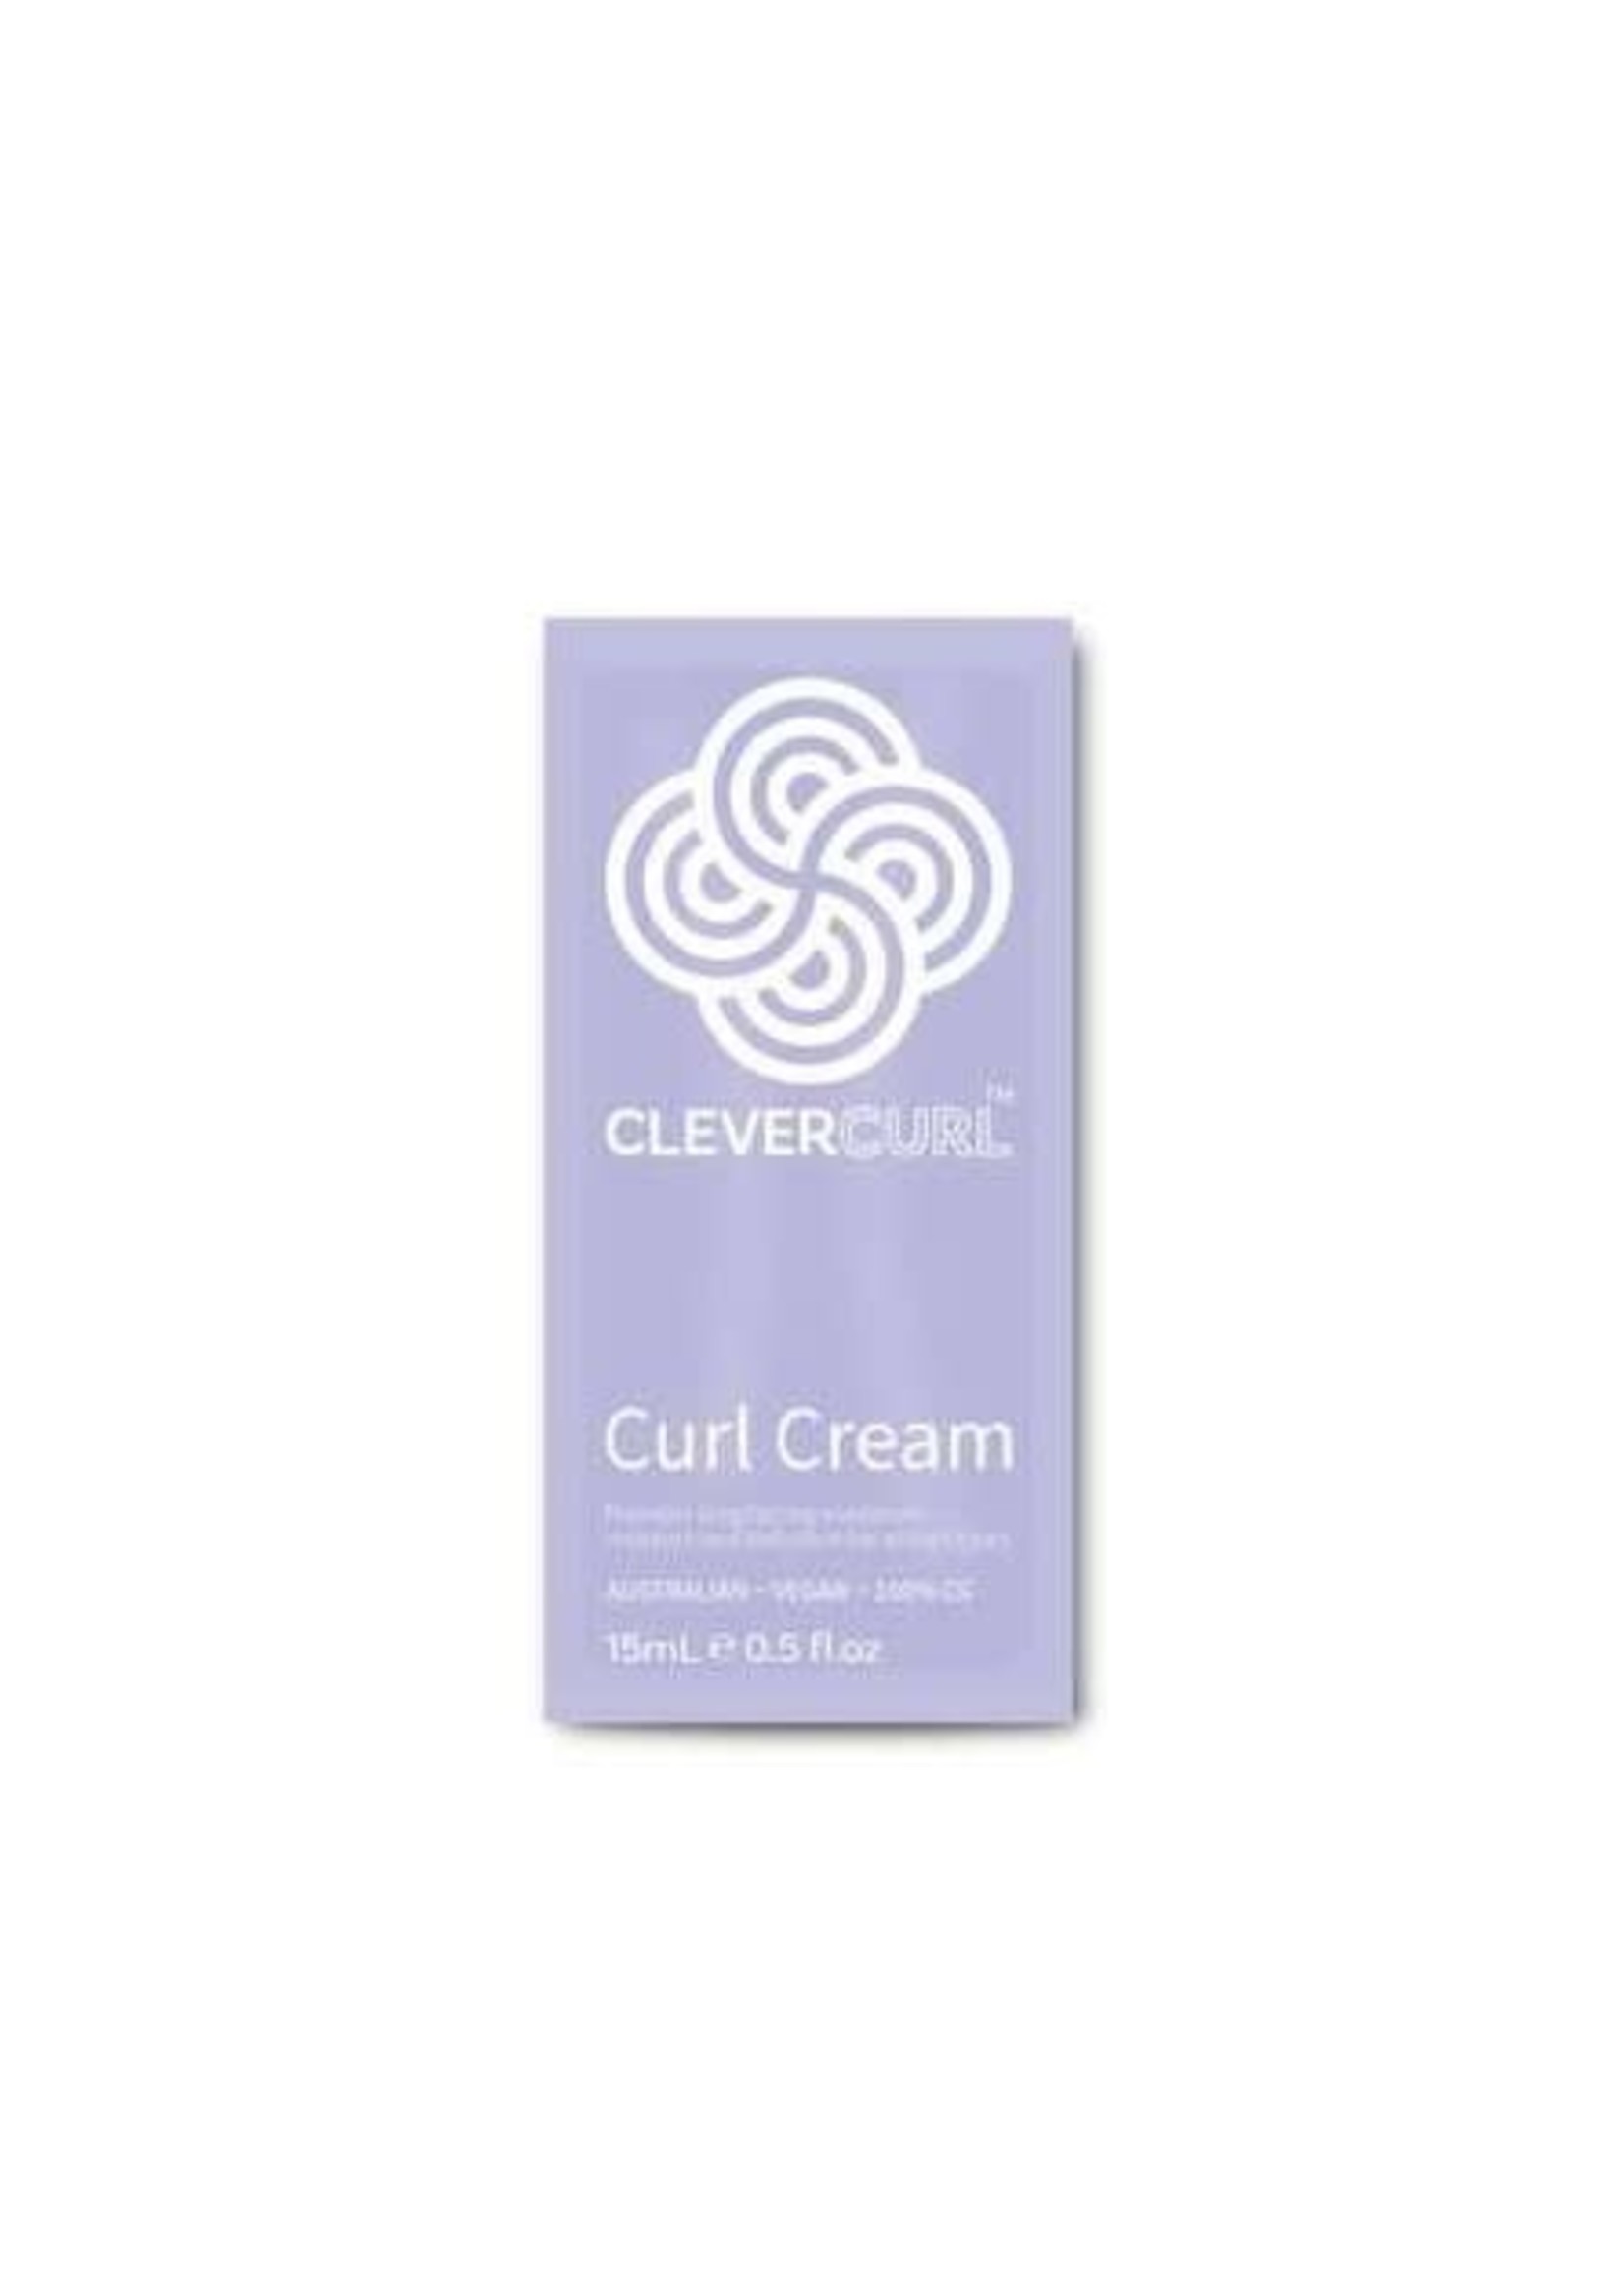 Clever Curl Clever Curl Cream 15ml Sachet